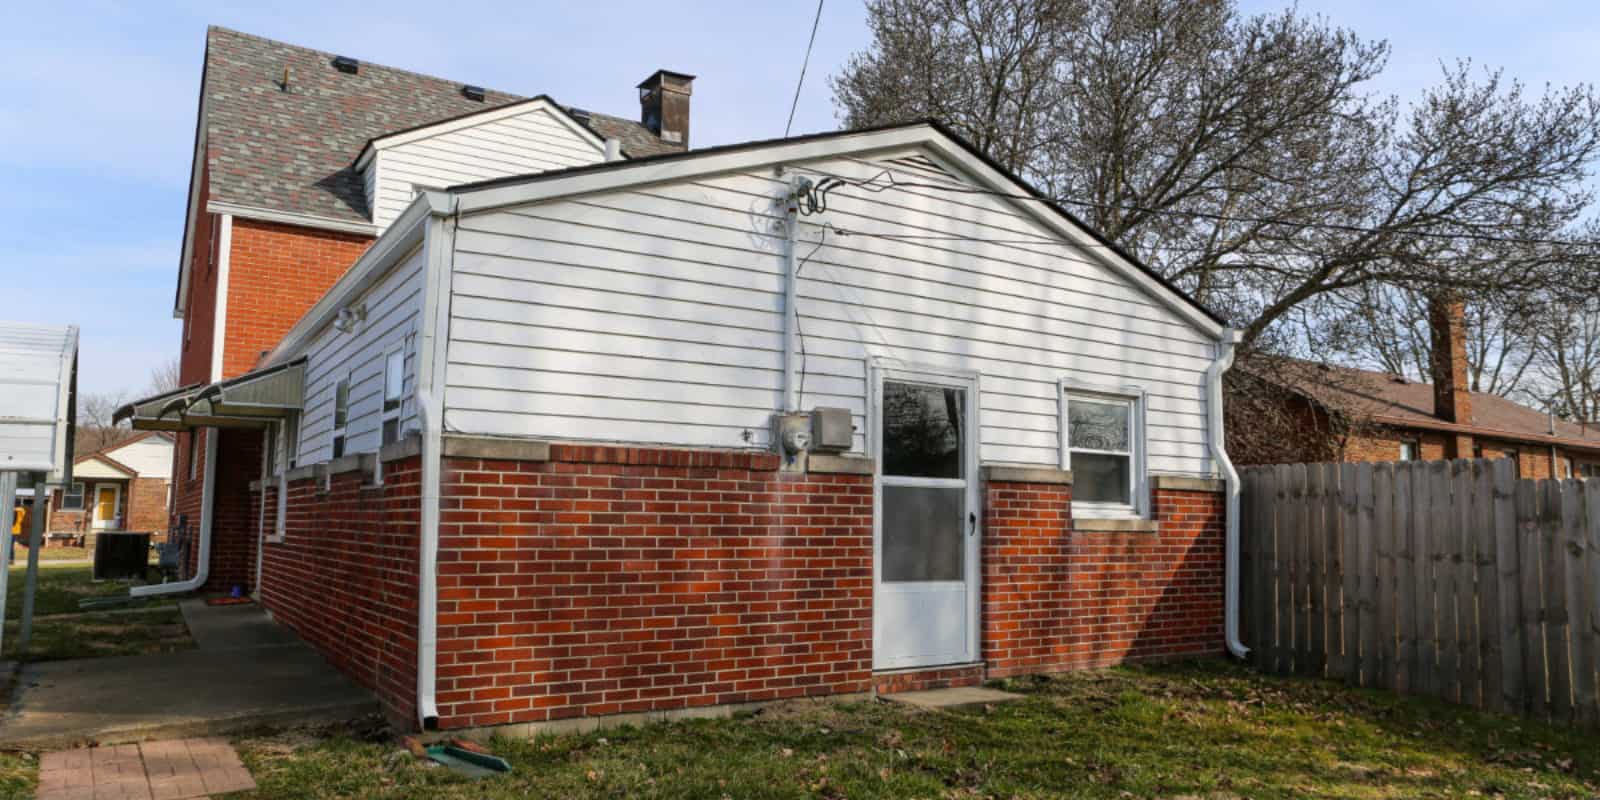 4 Bedroom 2.5 Bath For Sale with In Law Quarters and Private Fenced in Yard - 1009 E. Columbus Street Martinsville, IN 46151 - MSD Martinsville School District - Danielle Stiles Real Estate-21